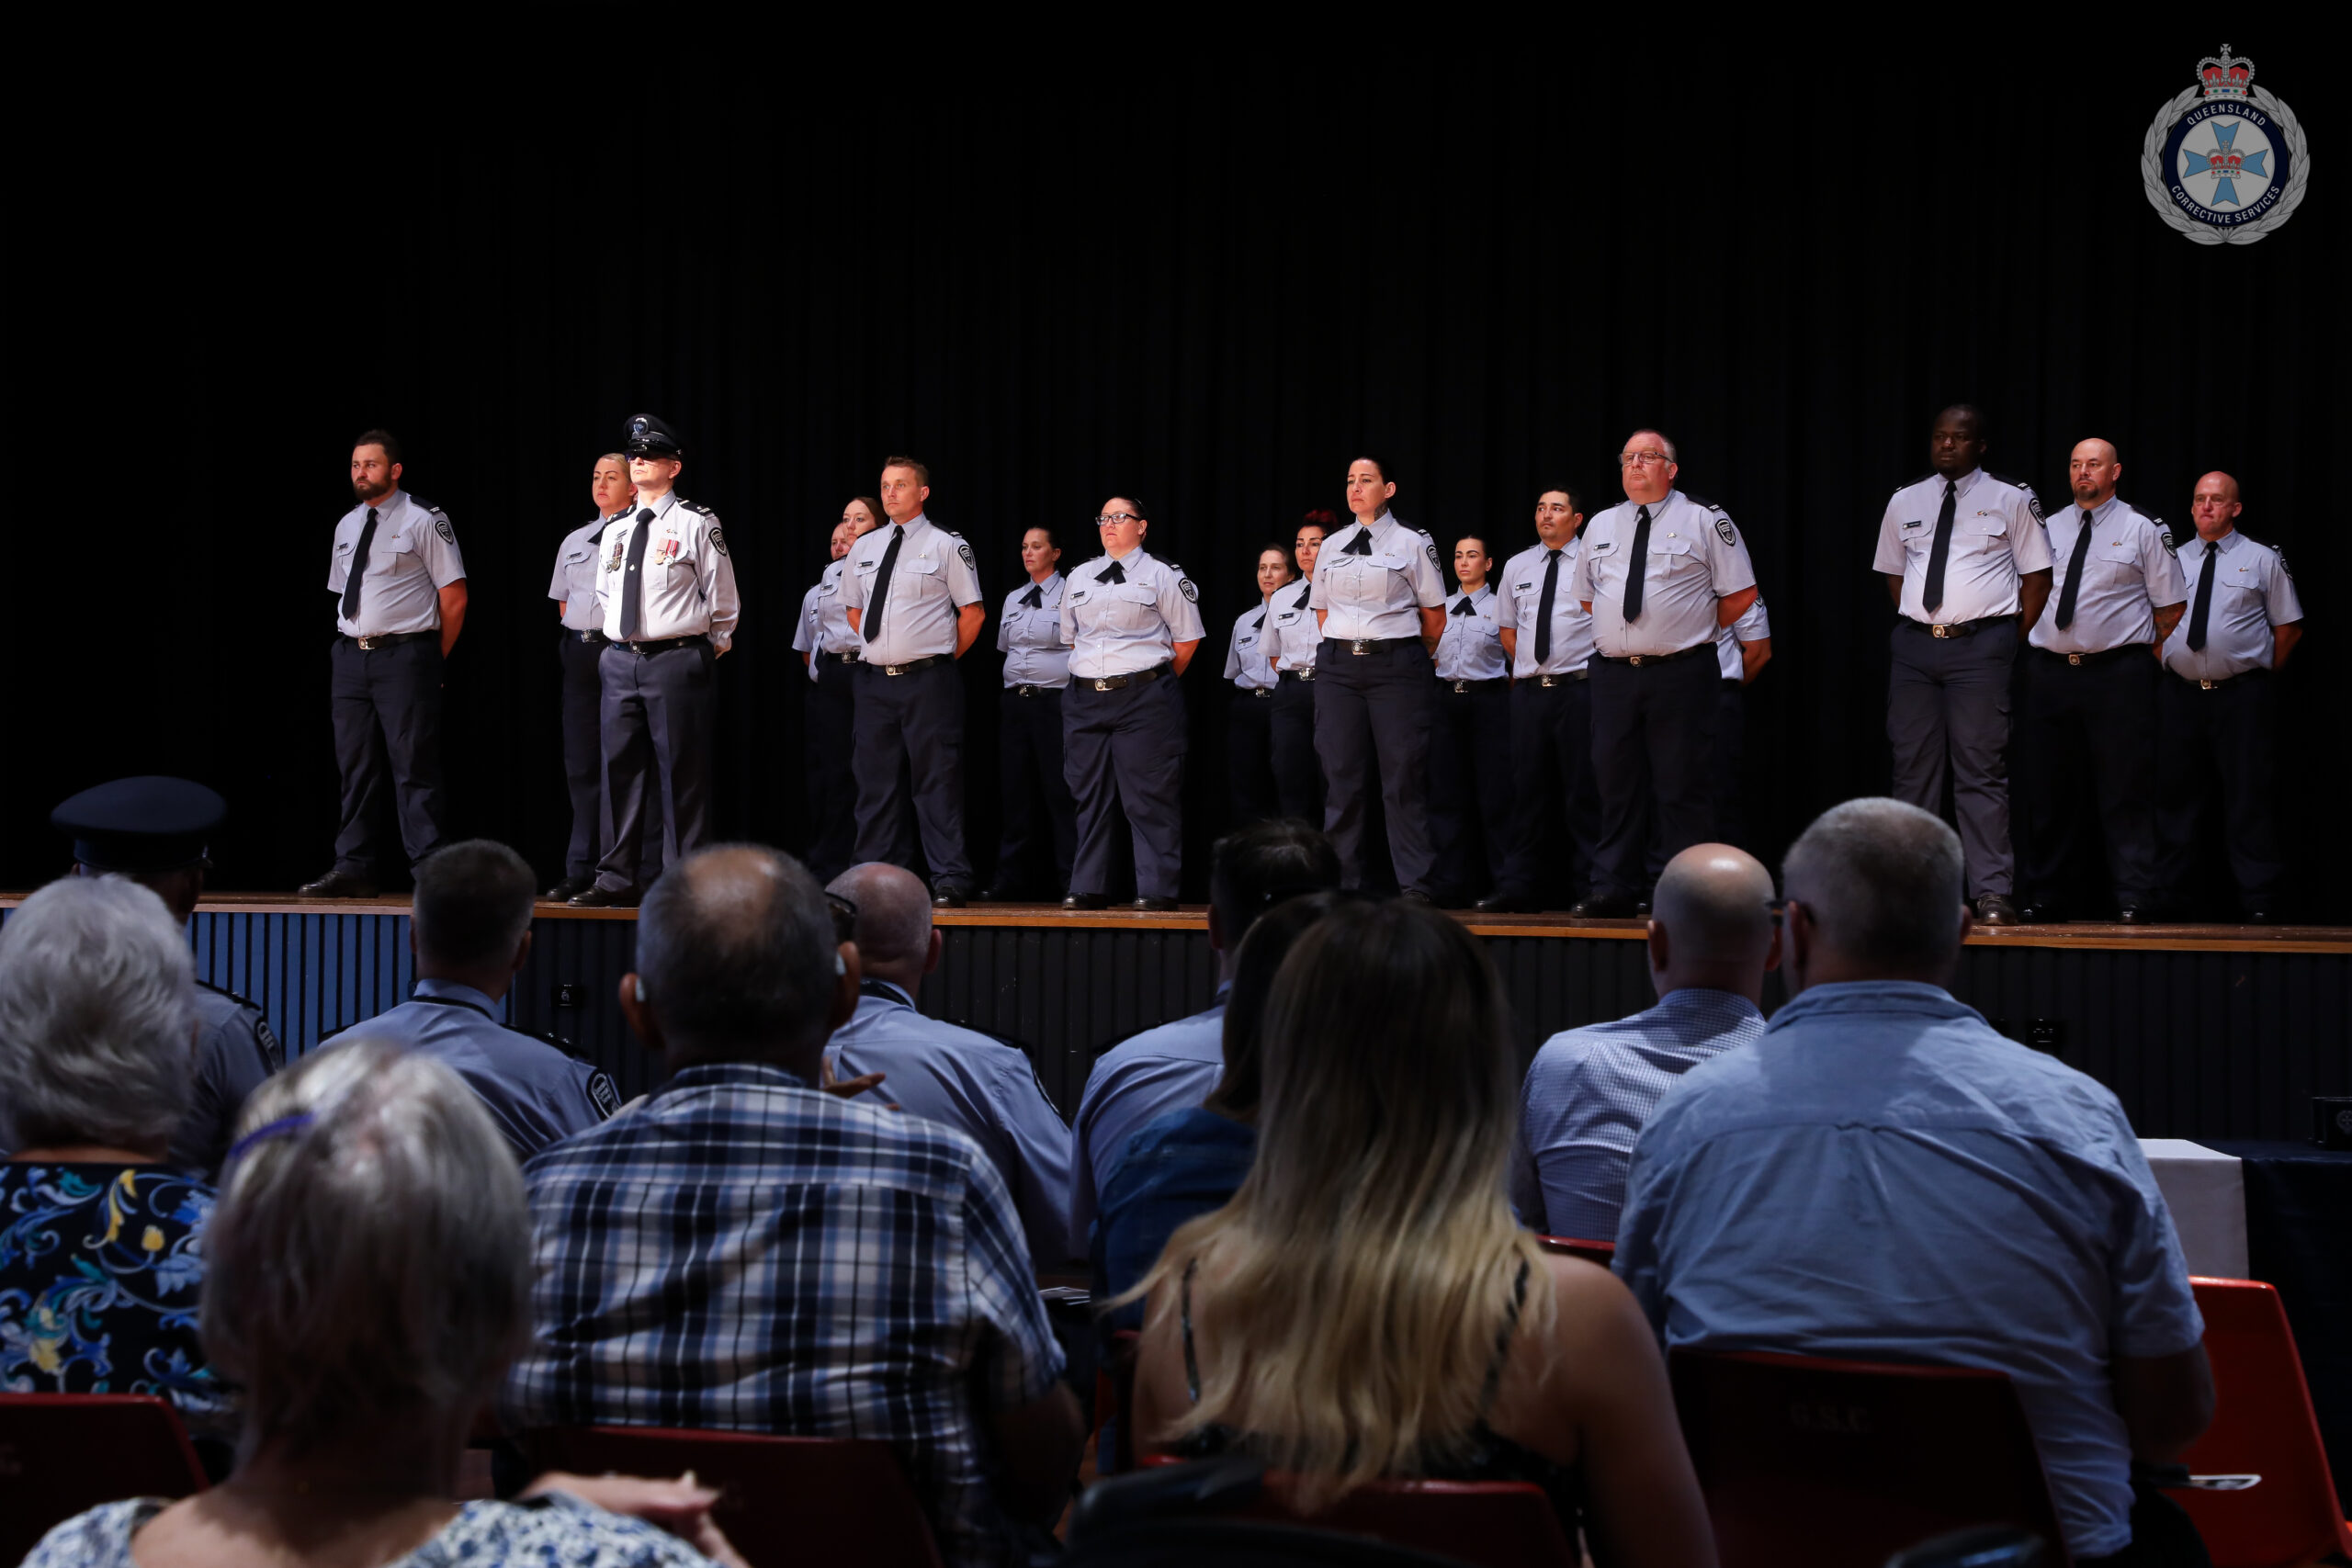 Friends and family look on as custodial correctional officers graduate 